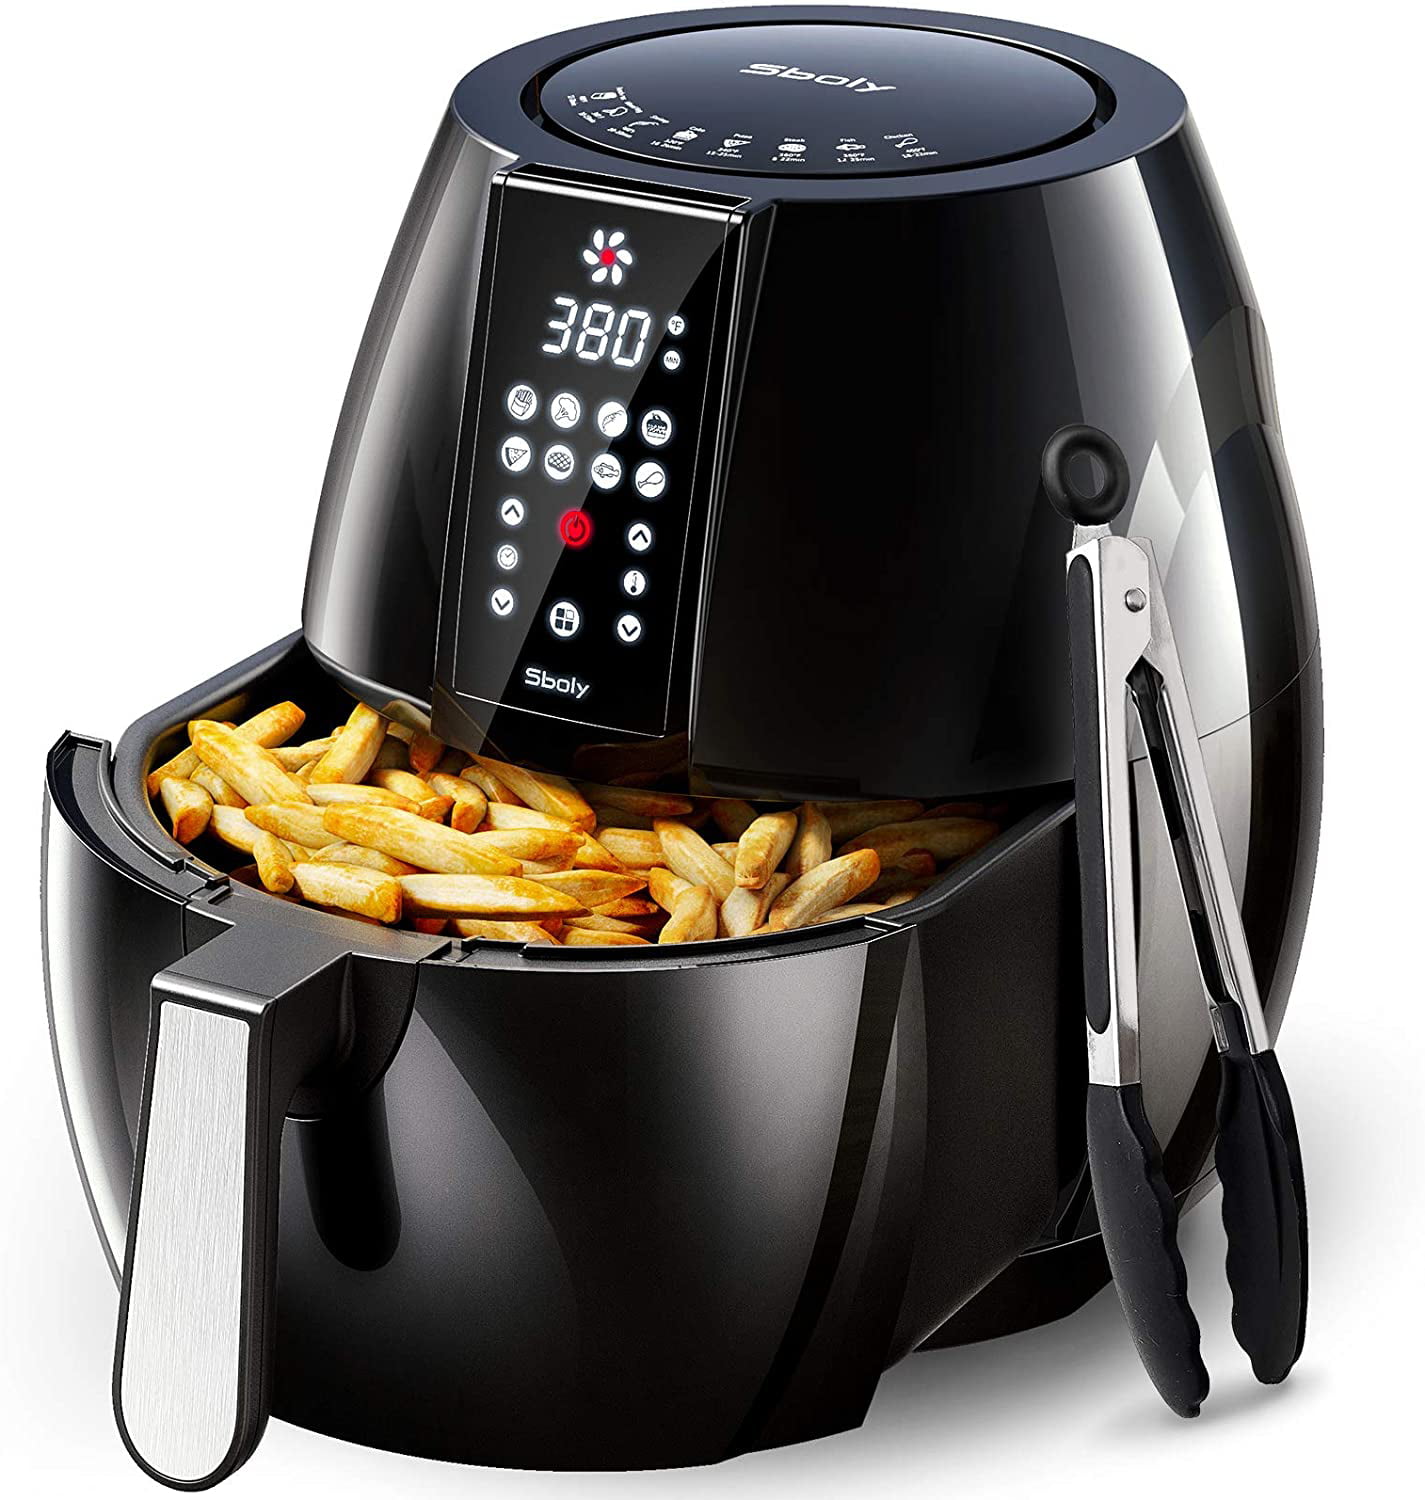 T-fal Easy Fry XXL Air Fryer & Grill Combo with One-Touch Screen, 8 Preset  Programs, 5.9 quarts, Black & Stainless Steel